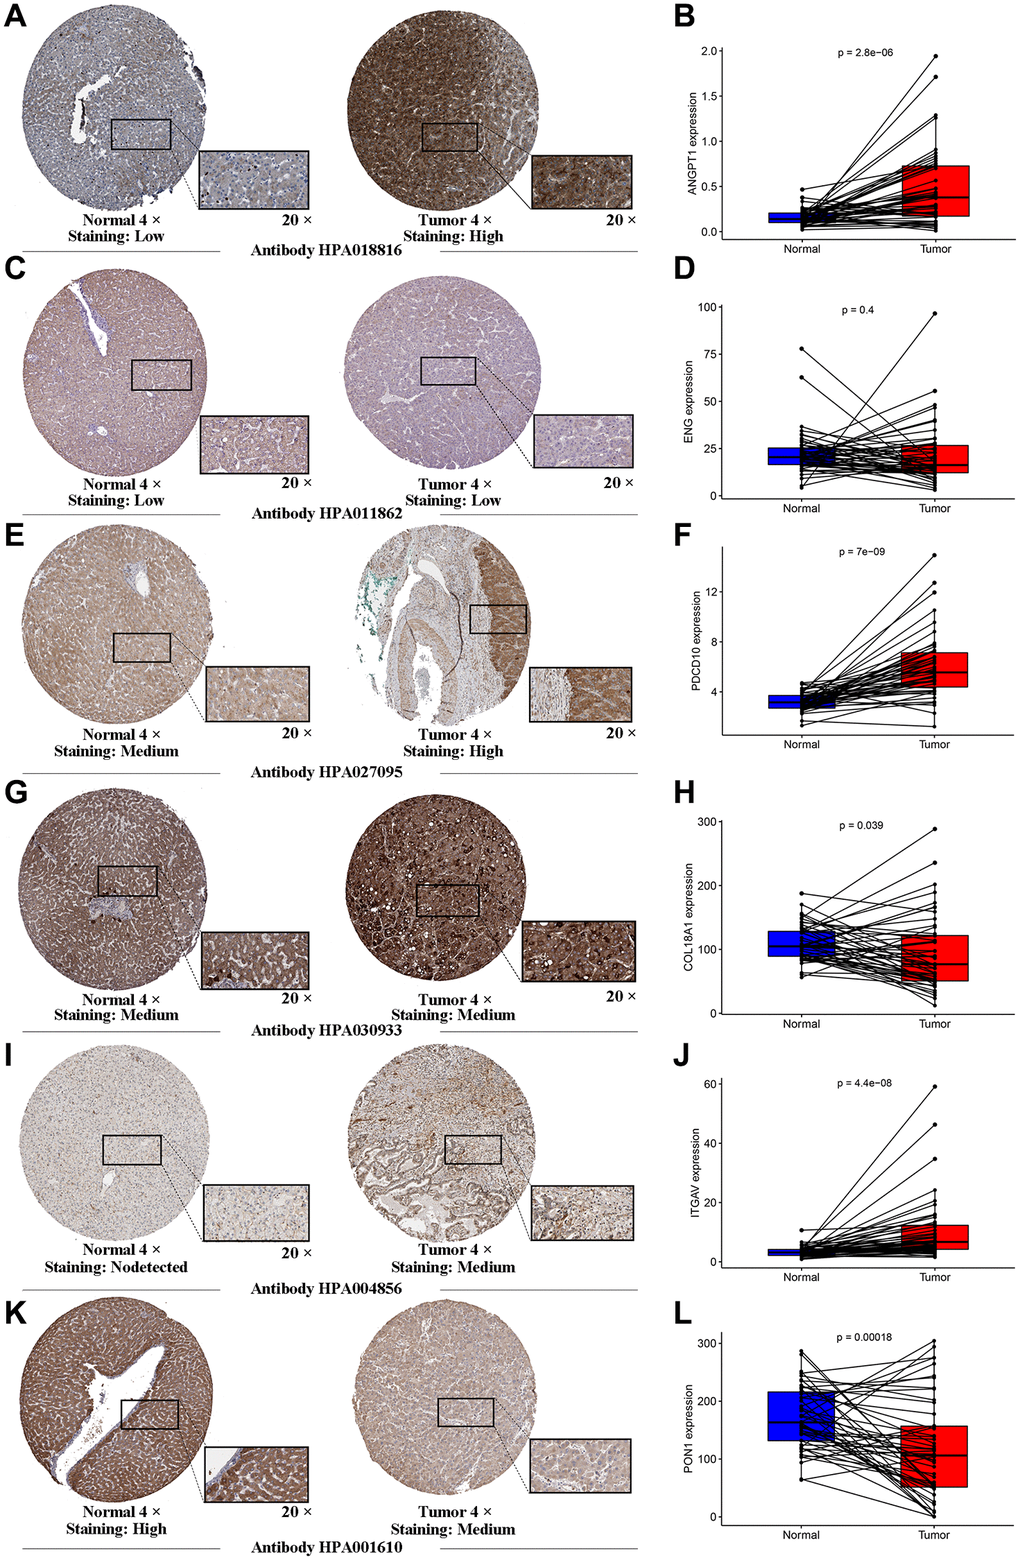 Human Protein Atlas immunohistochemistry of normal sample and tumor sample. The expression levels of ANGTP1 (A, B), ENG (C, D), PDCD10 (E, F), COL18A (G, H), ITGAV (I, J) and PON1 (K, L) in tumor and normal tissues were validated in the TCGA cohort, using the paired expression of the same individual normal tissue and tumor tissue.